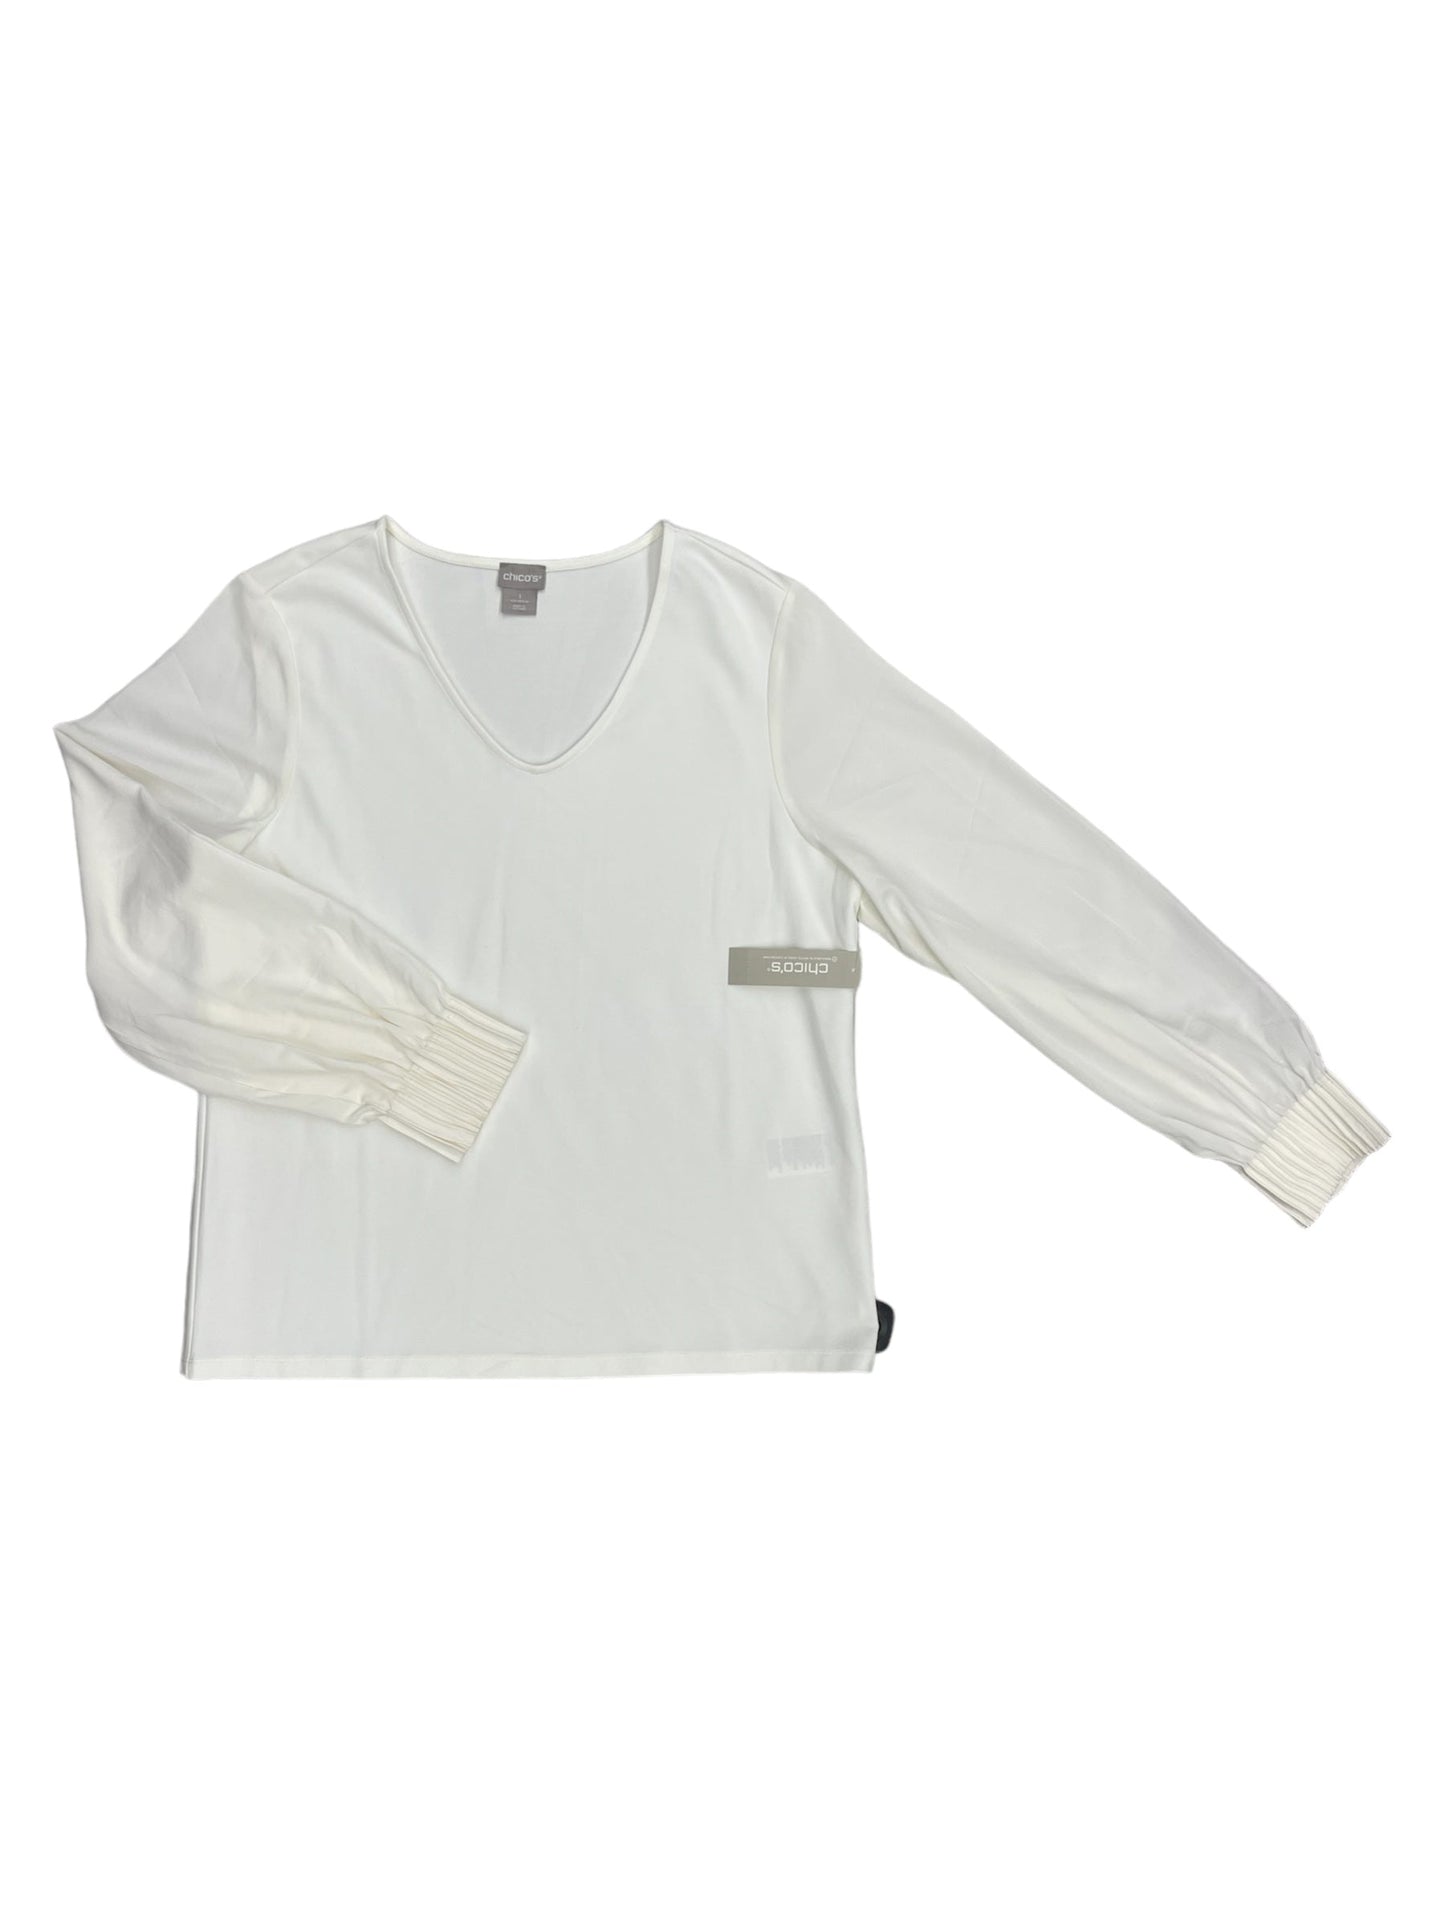 White Top Long Sleeve Chicos, Size M